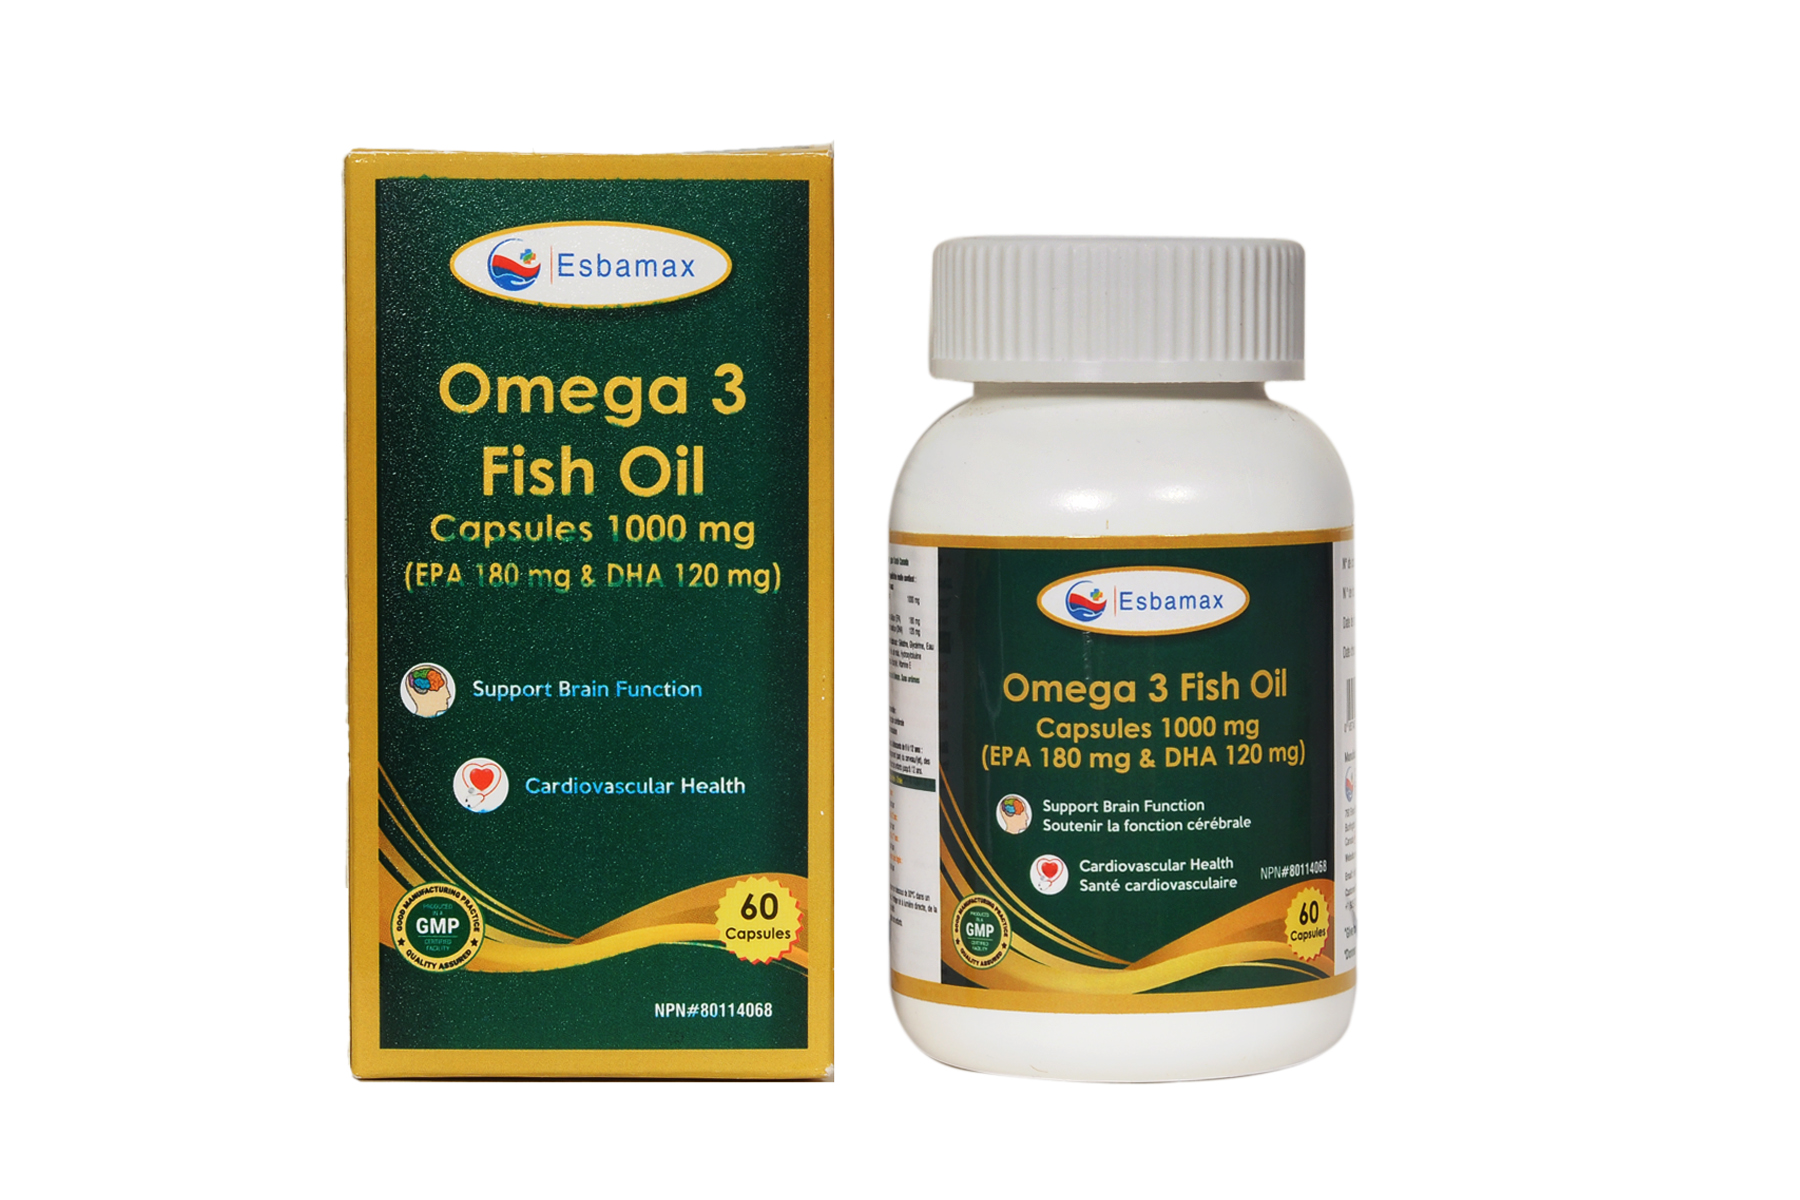 Omega 3 Fish Oil Cap. 1000 mg (EP	A 180 mg & DHA 120 mg)........"FOR PRIVATE LABEL ONLY"